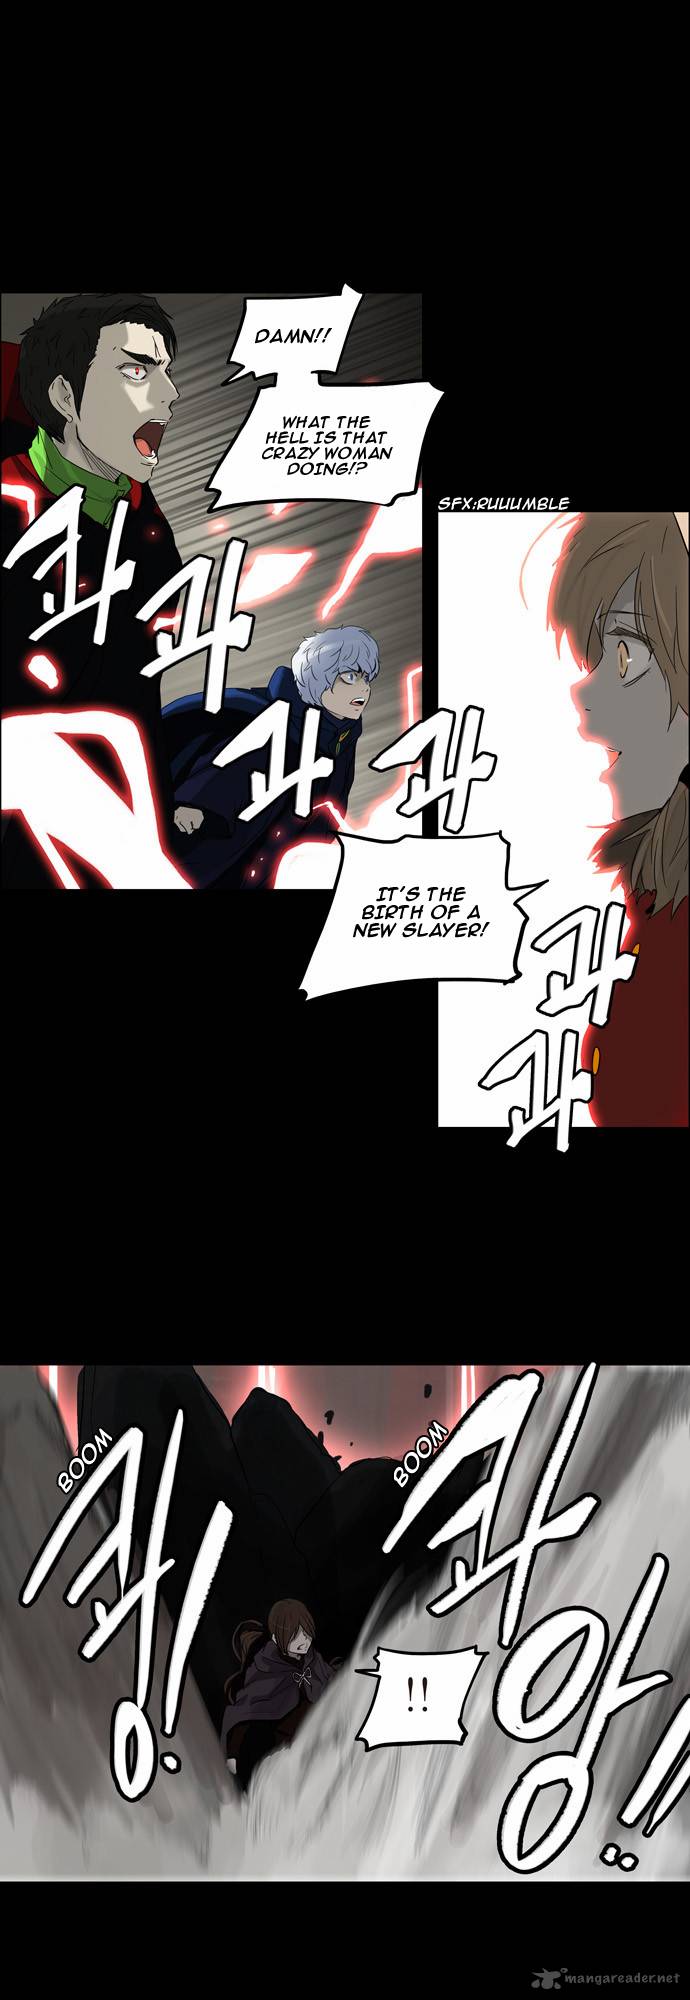 Tower Of God 131 1